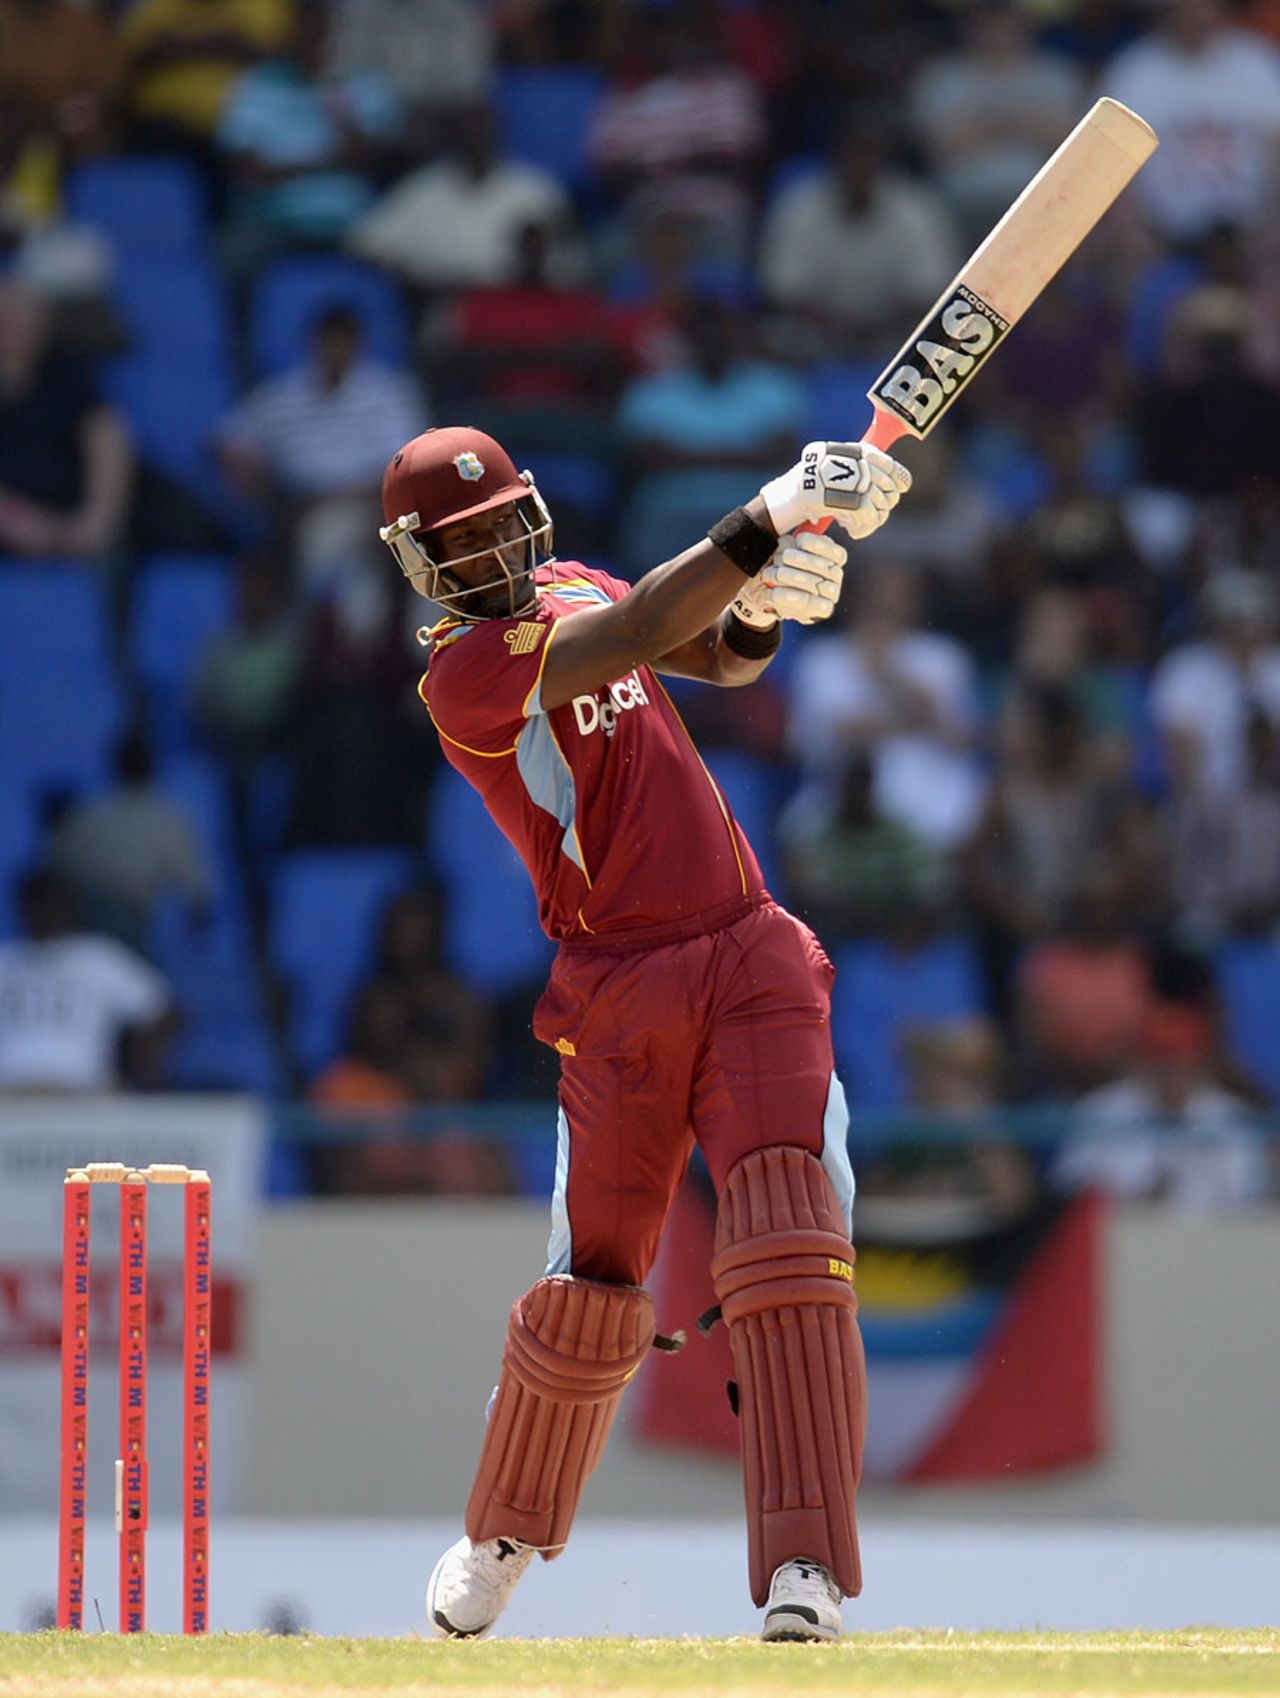 Darren Sammy used the long handle to good effect, West Indies v England, 1st ODI, North Sound, February 28, 2014